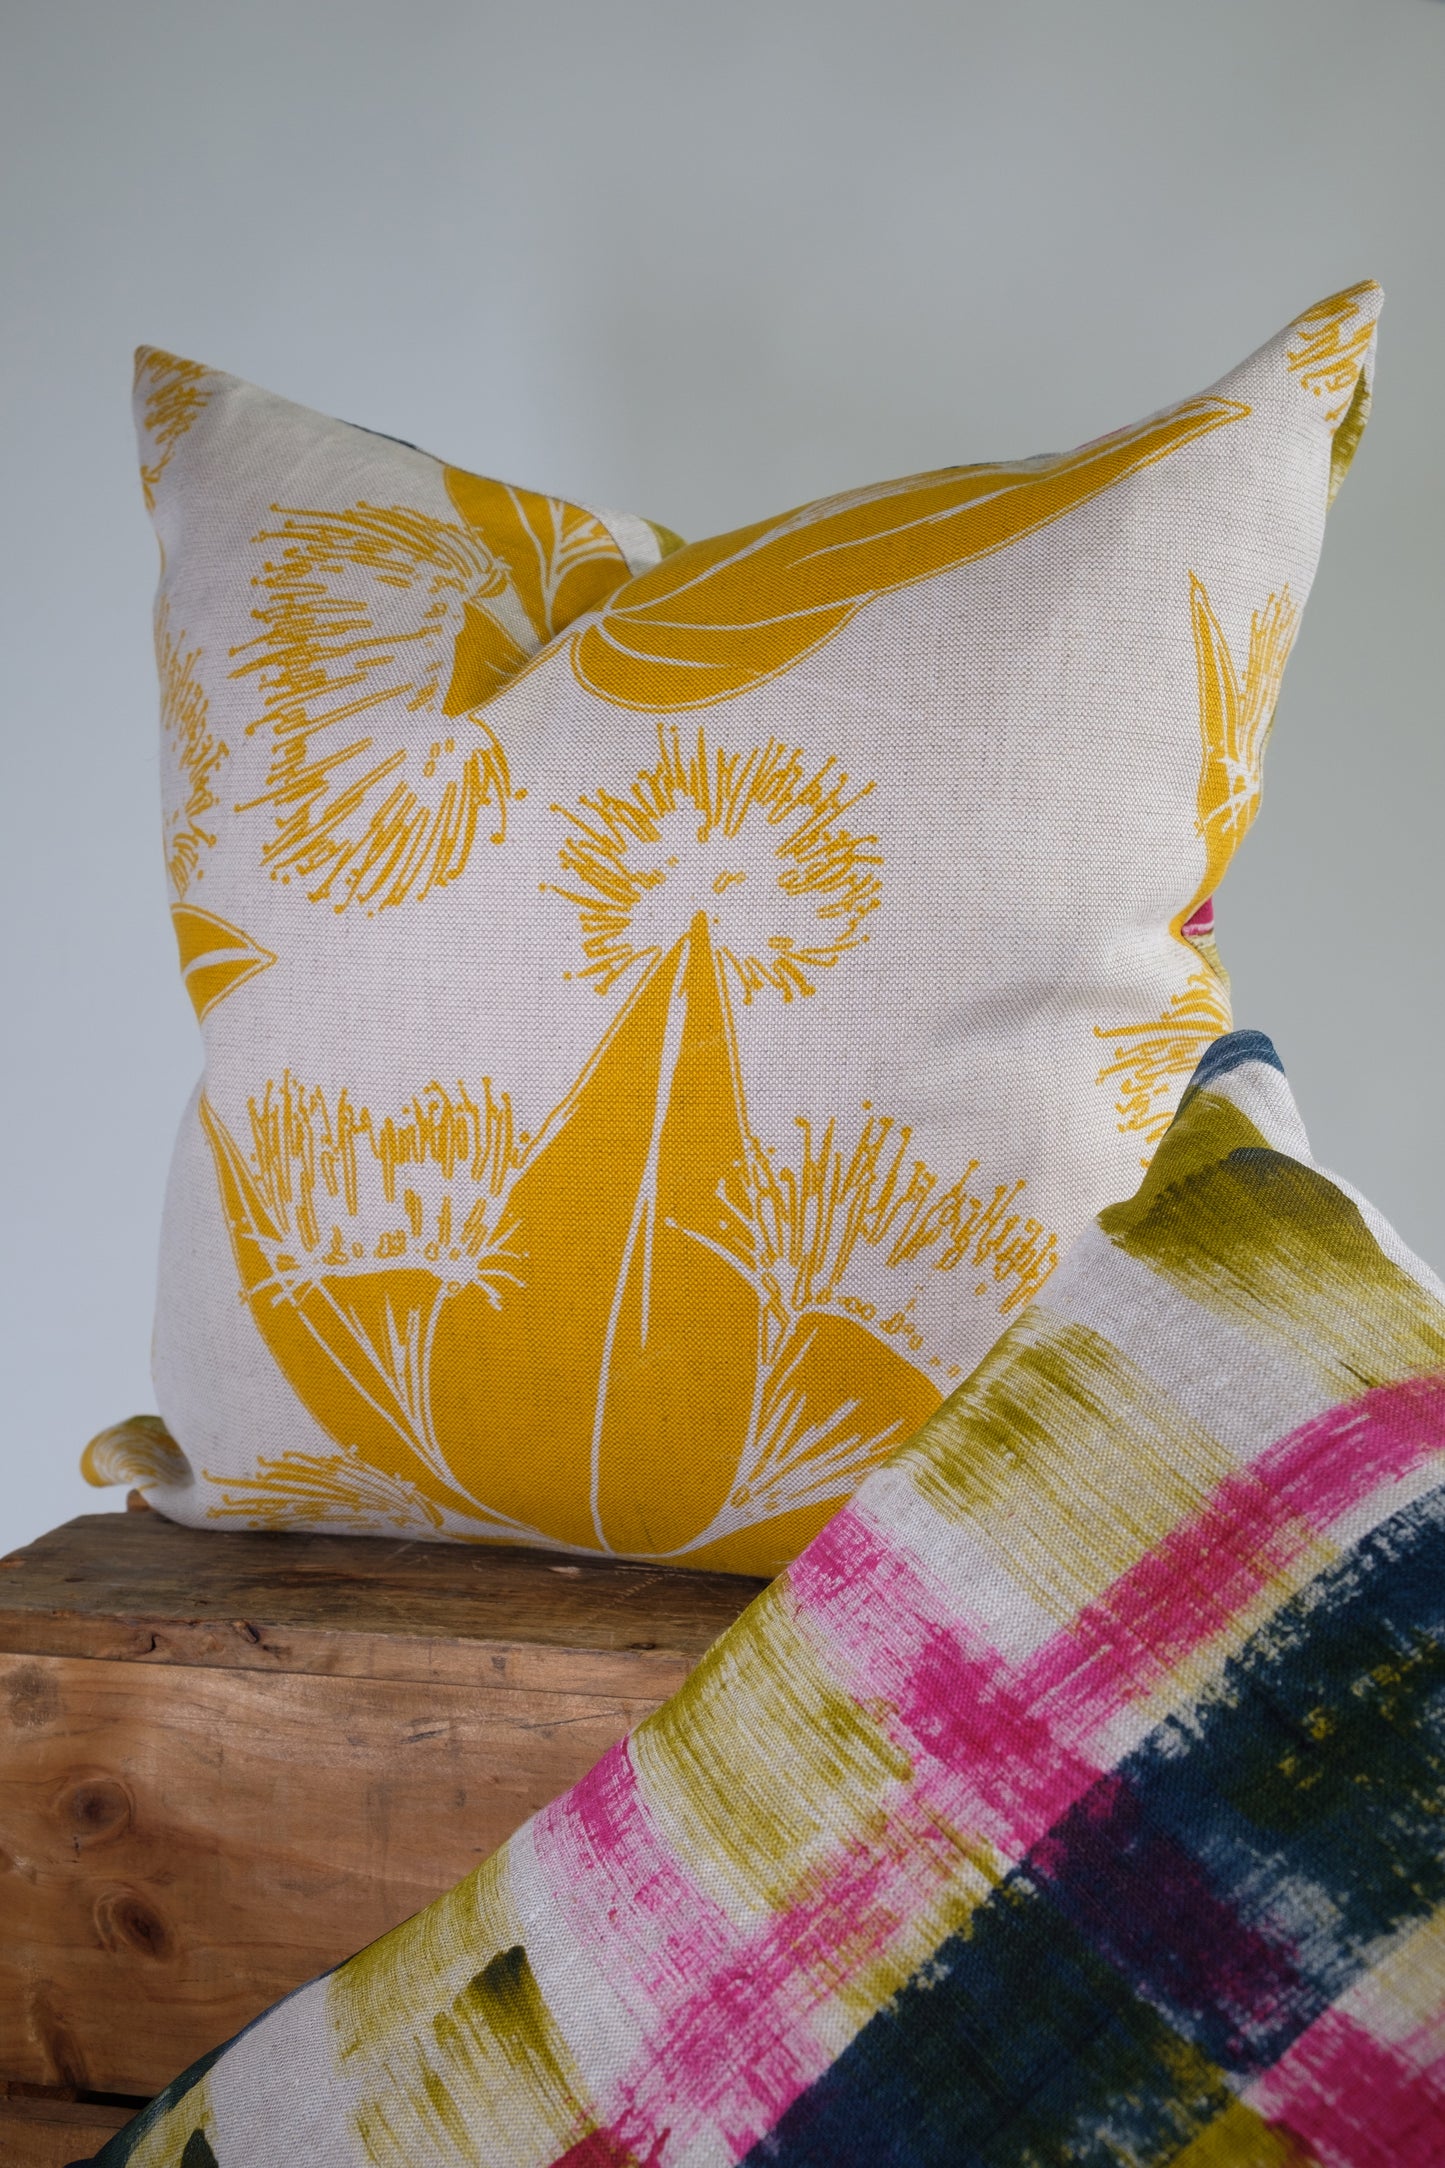 Linen Cushion Covers featuring hand painted linen and Gumnuts pattern in Mustard on Linen Hopper